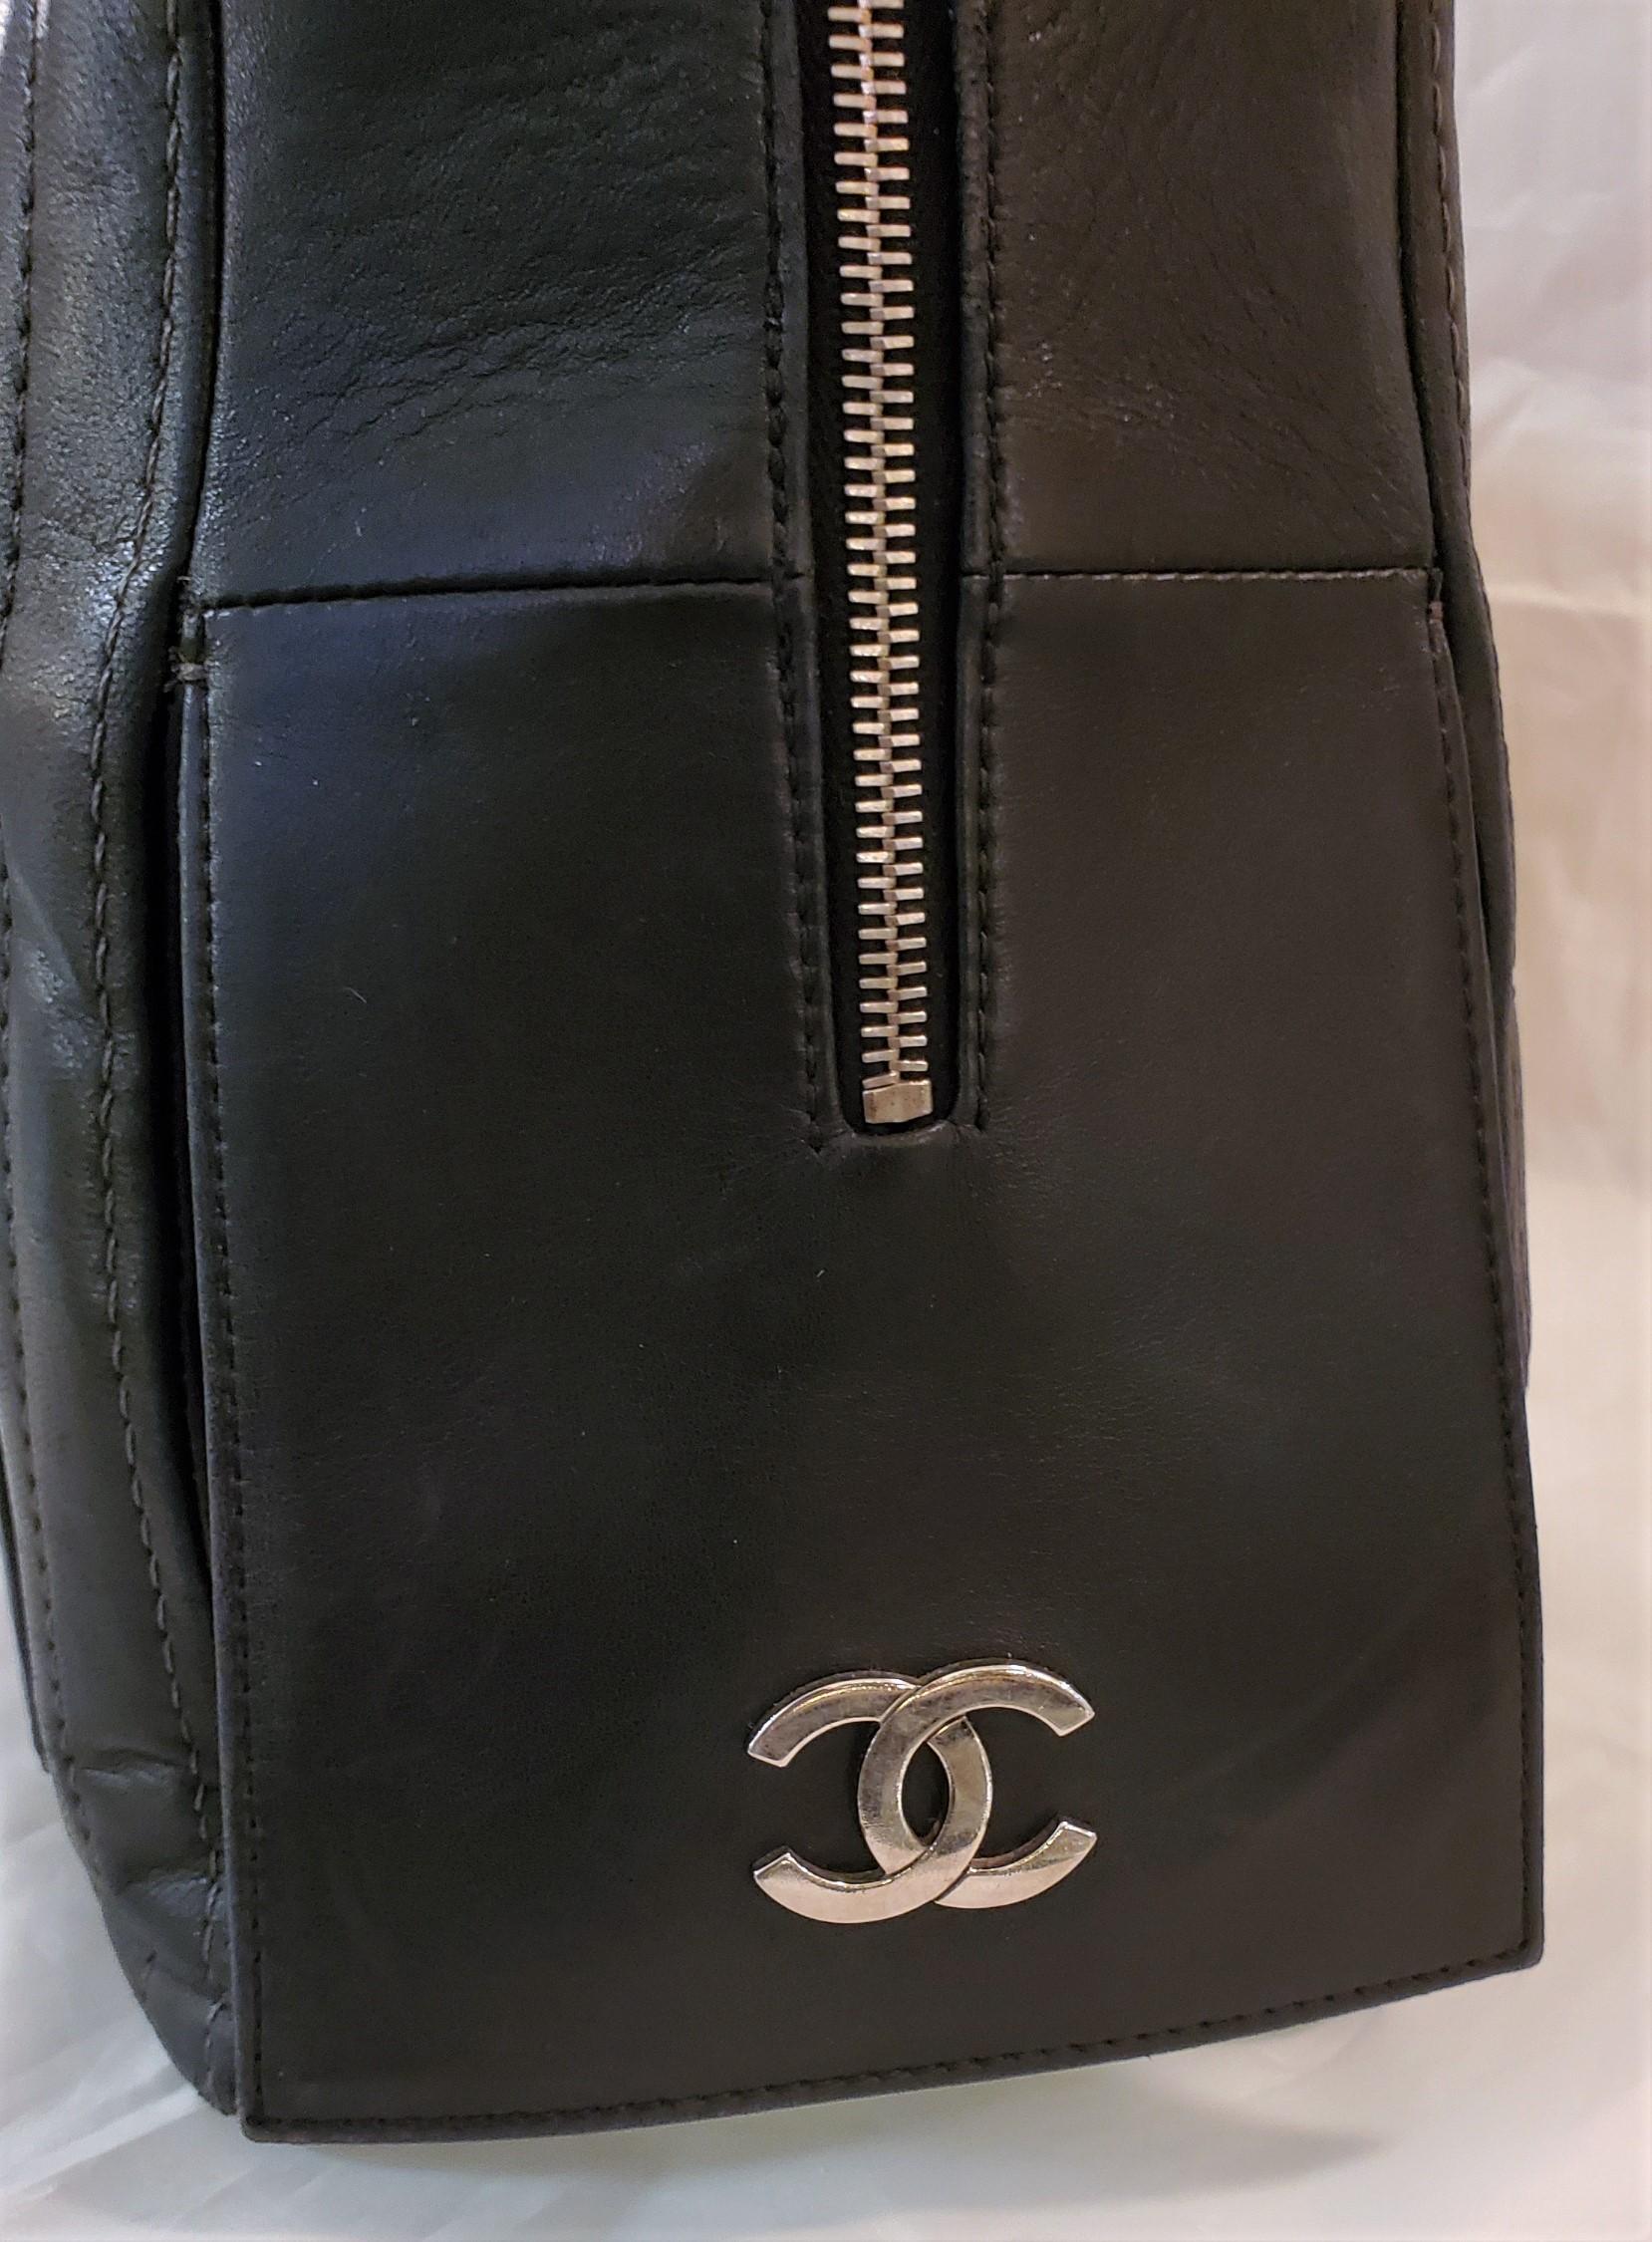 Auth Vintage Chanel Jumbo Leather Chained Handbag For Sale 7